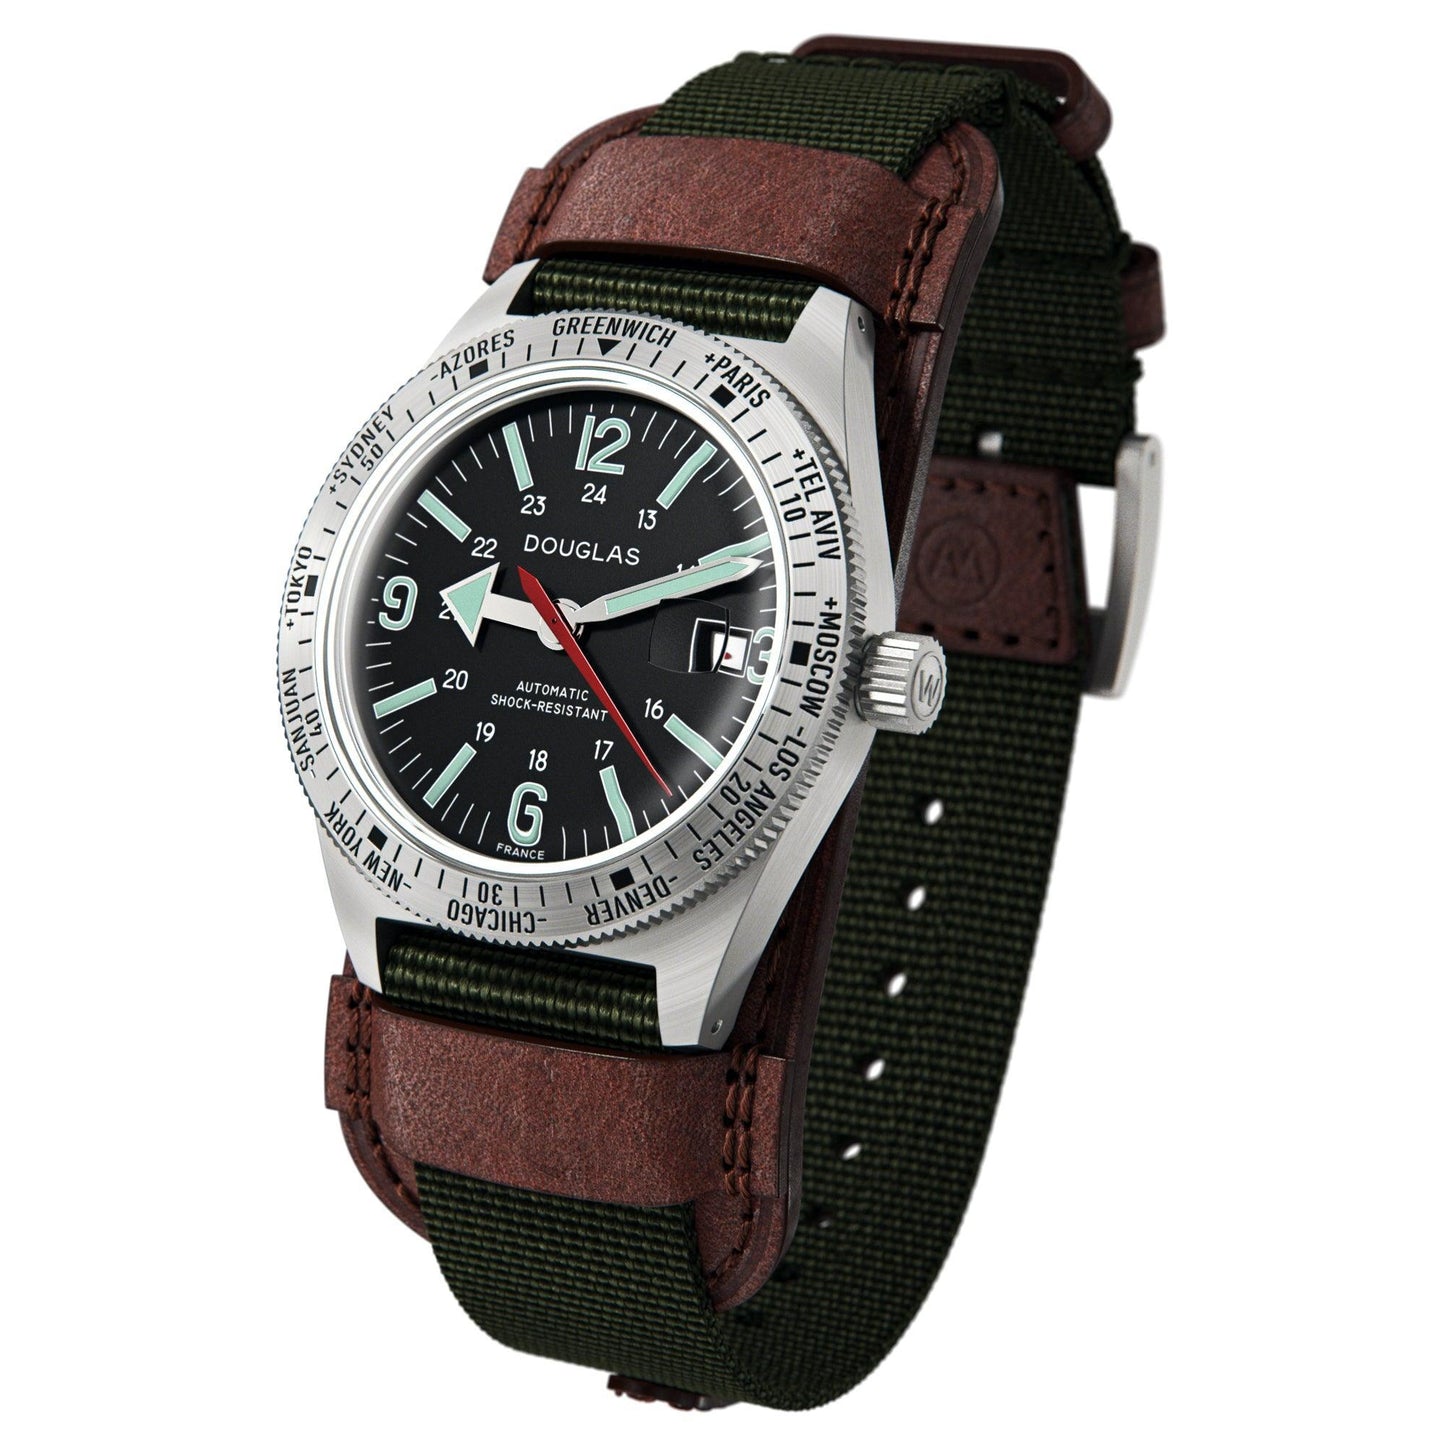 Skindiver WT Professional Tool-Watch with Black Dial and Green C7 Super-LumiNova, on Steel Case 3/4 view